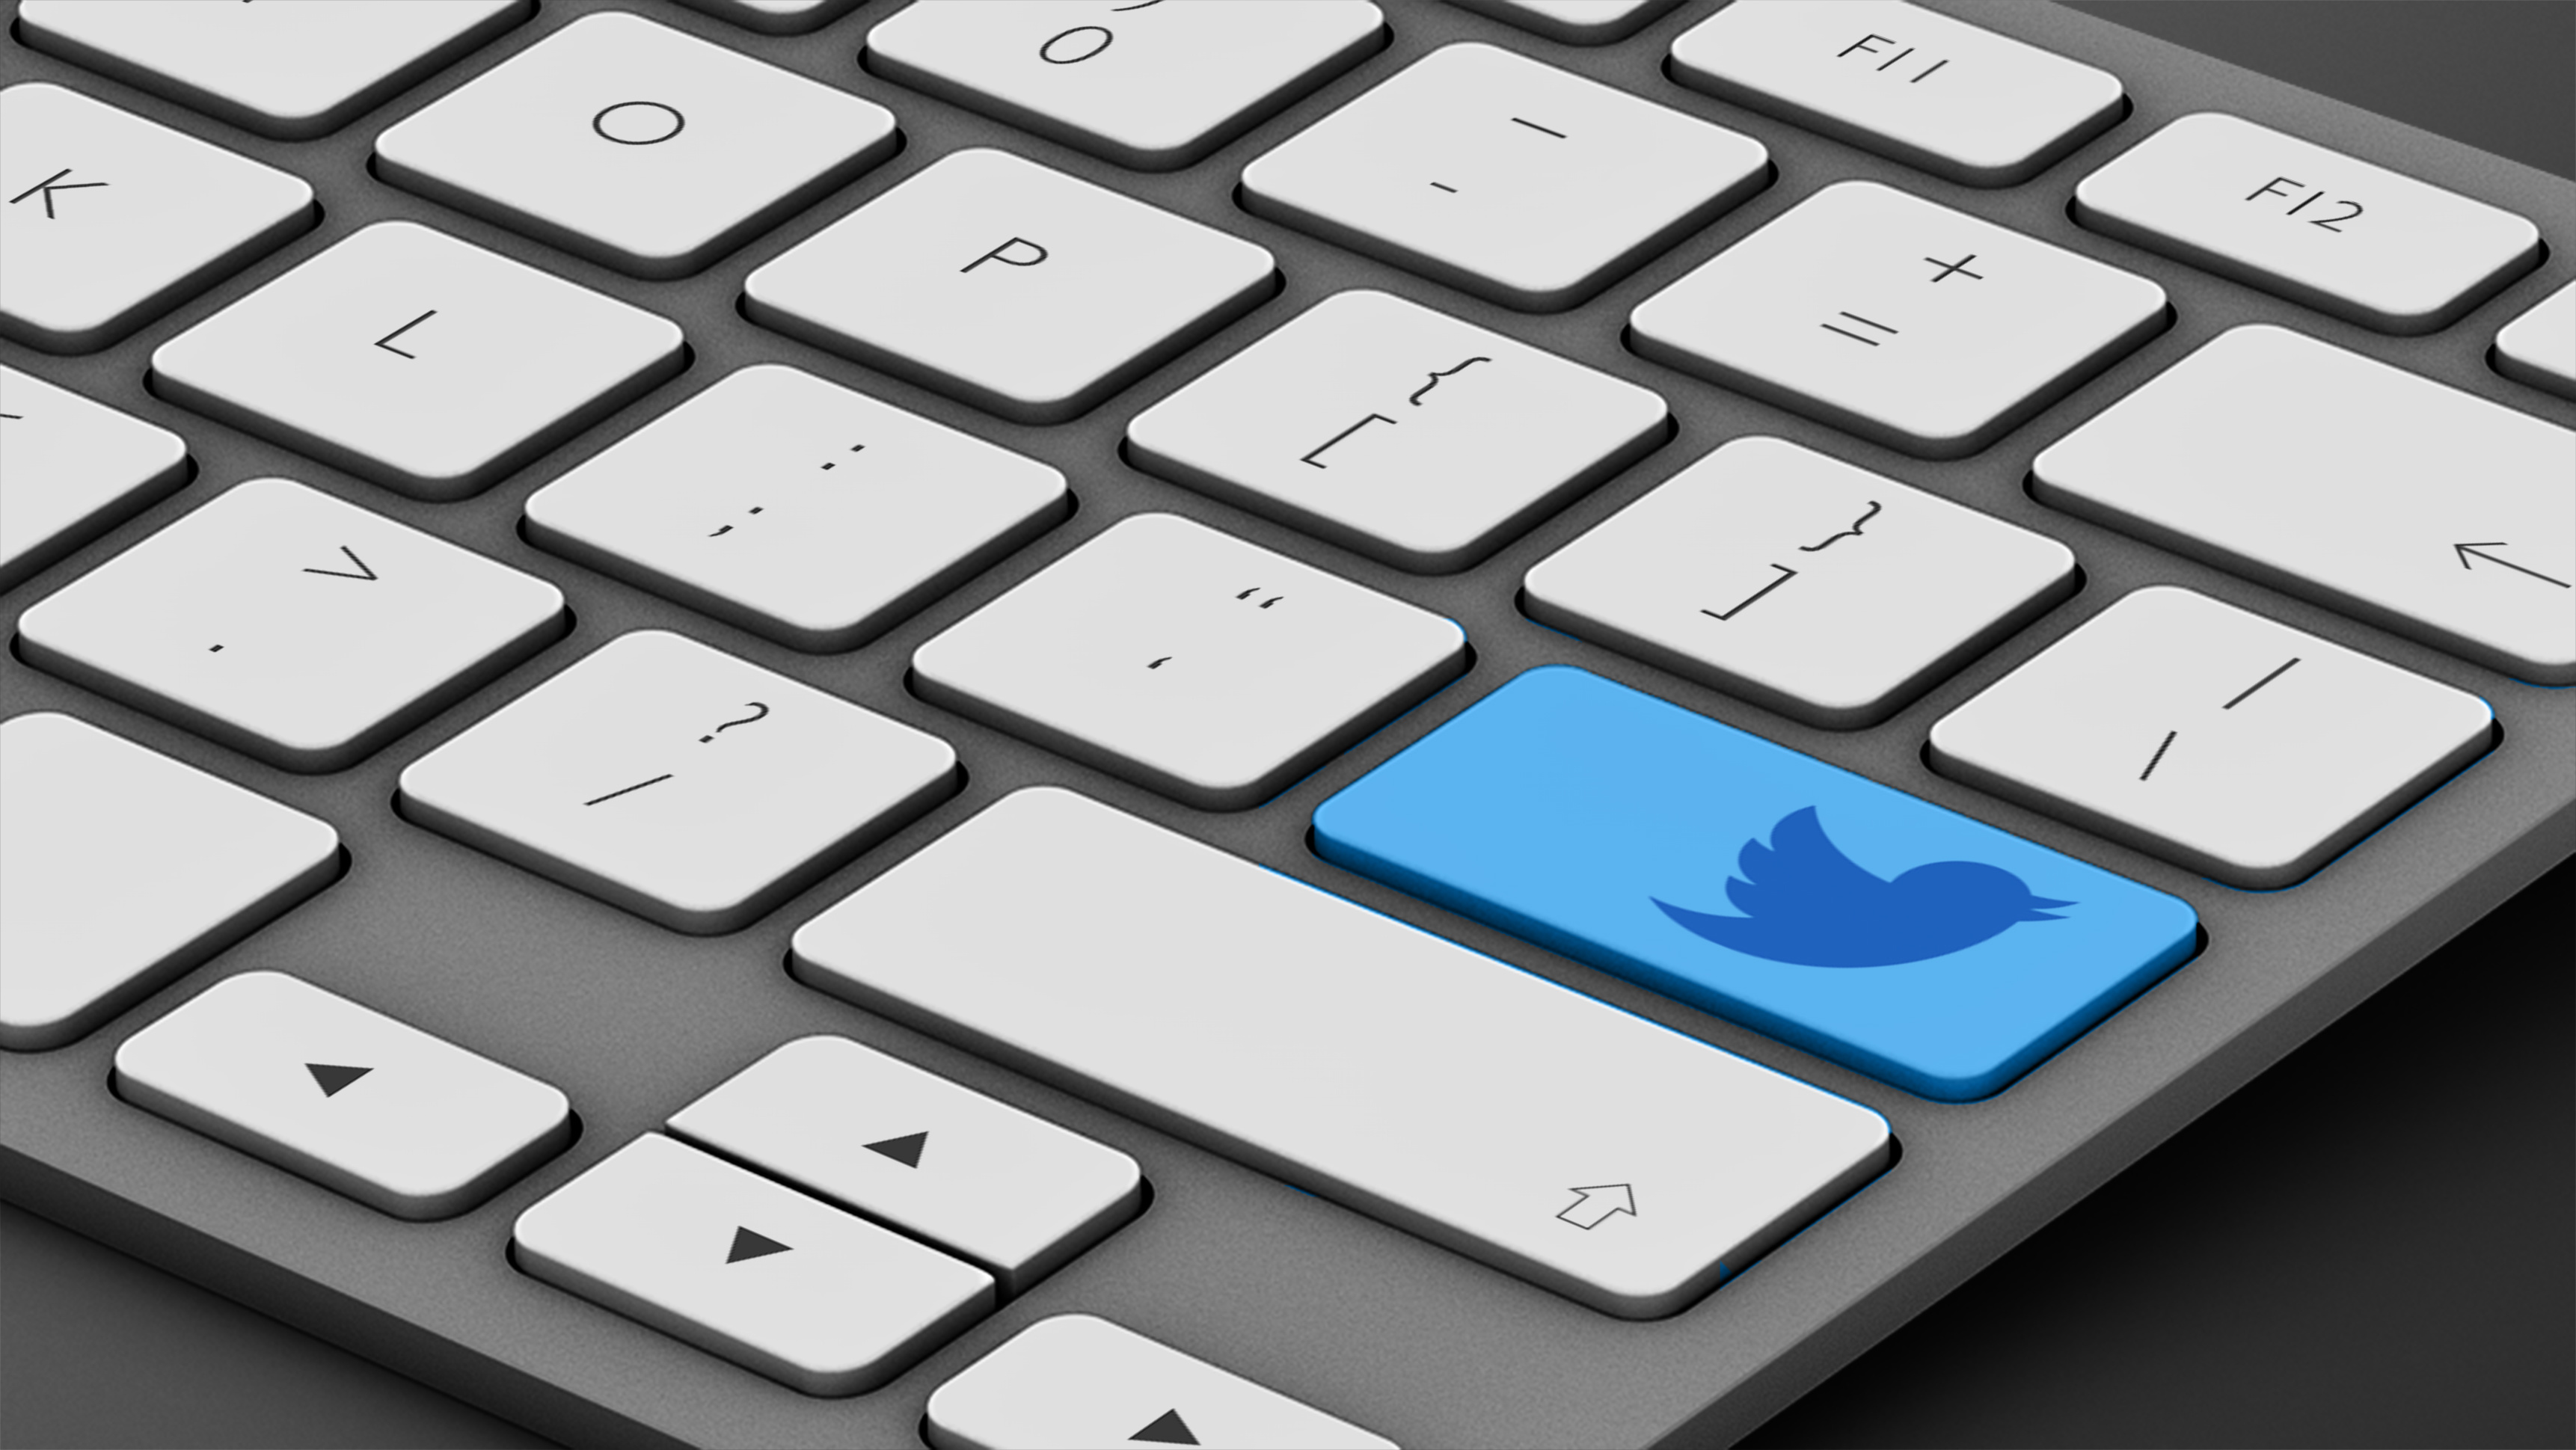 Computer keyboard with Twitter logo as the return key.